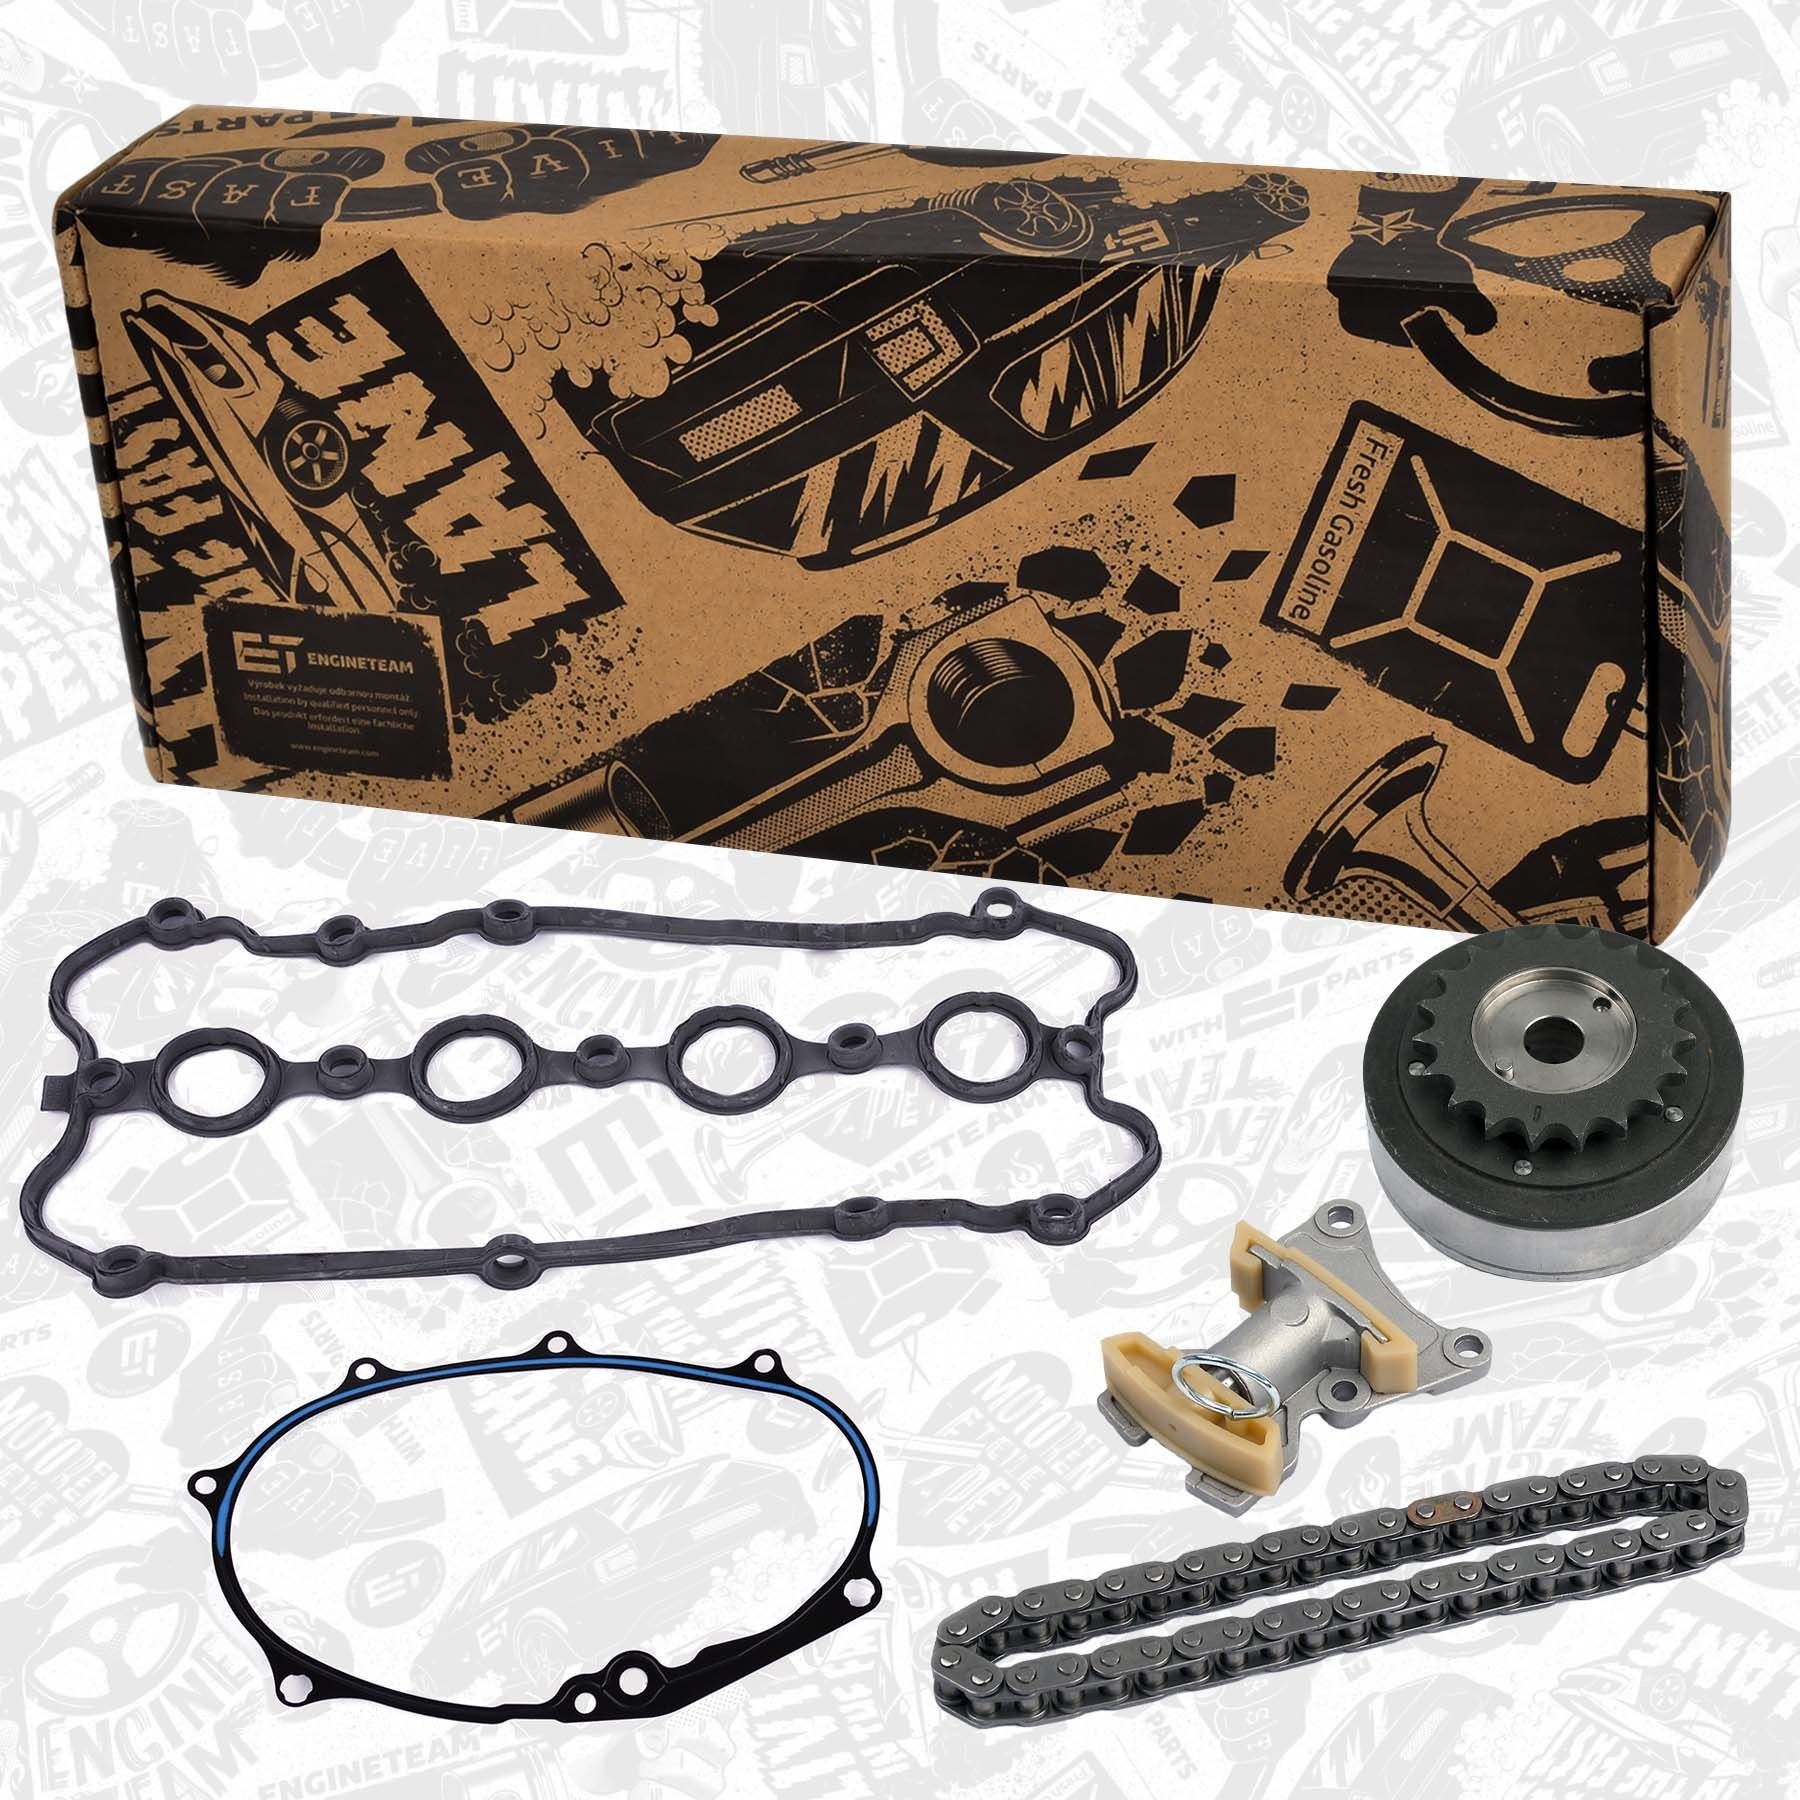 ET ENGINETEAM RS0061VR1 Timing chain kit with gaskets/seals, Simplex